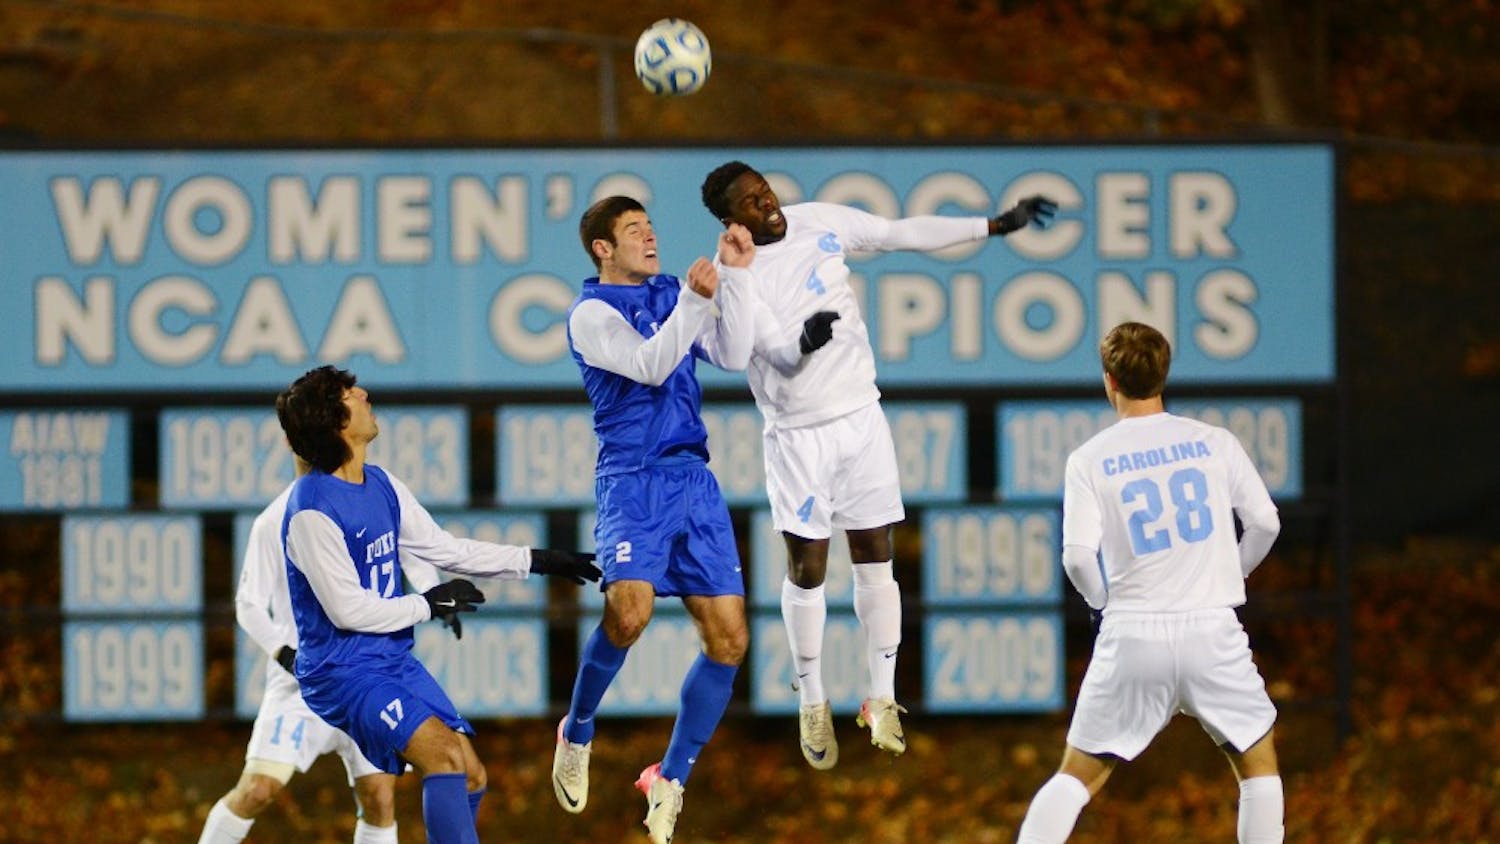 	North Carolina defender Boyd Okwuonu leaps to fend off Duke’s Will Donovan as UNC’s Alex Olofson waits to recieve the ball in the Tar Heels’ 1-0 victory.